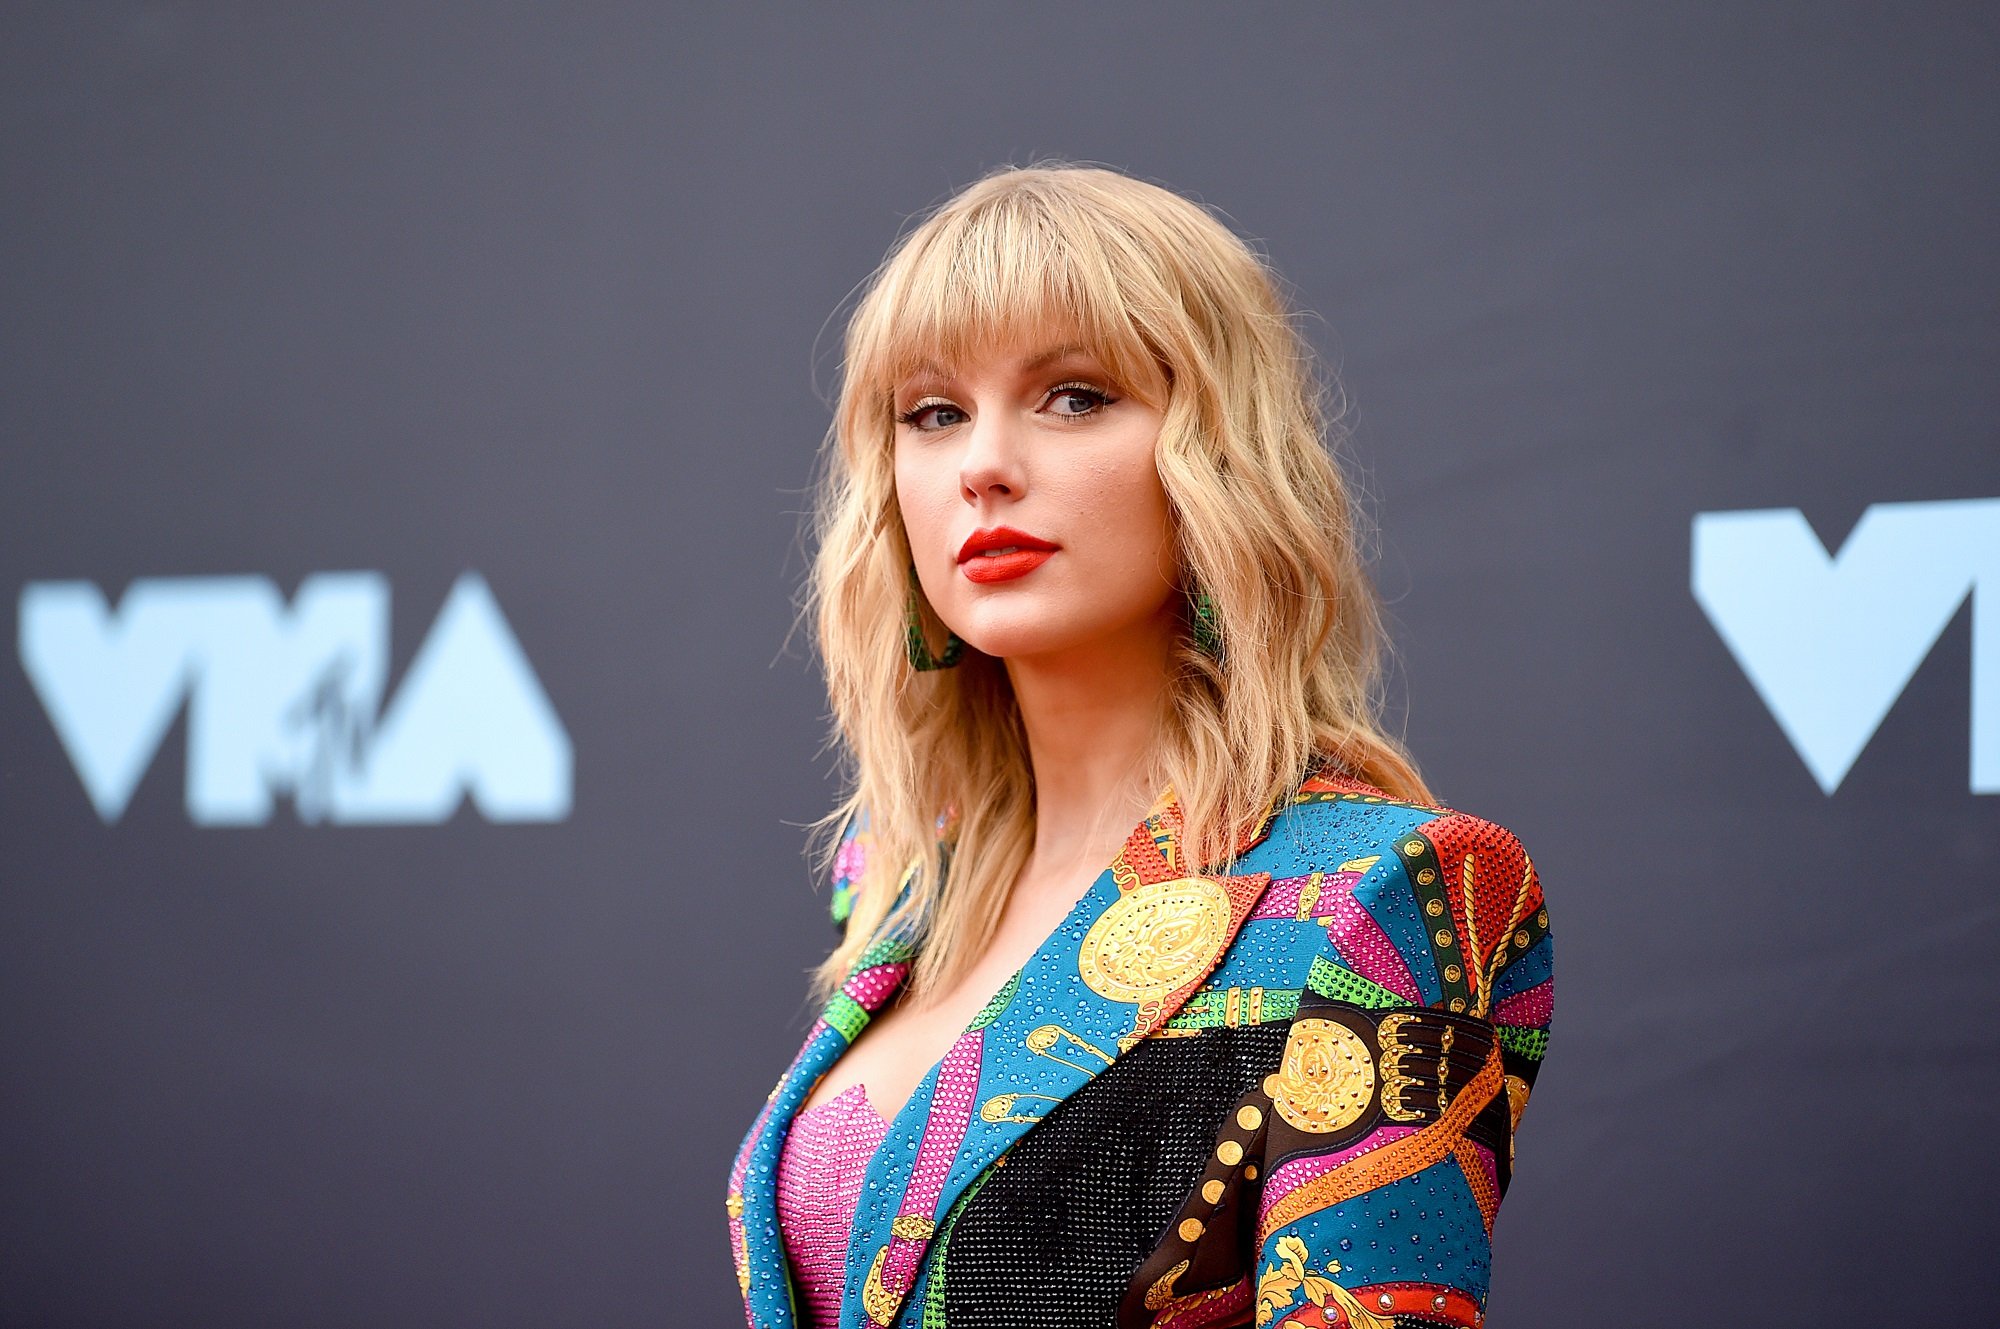 Taylor Swift looks toward the camera while attending the 2019 MTV Video Music Awards